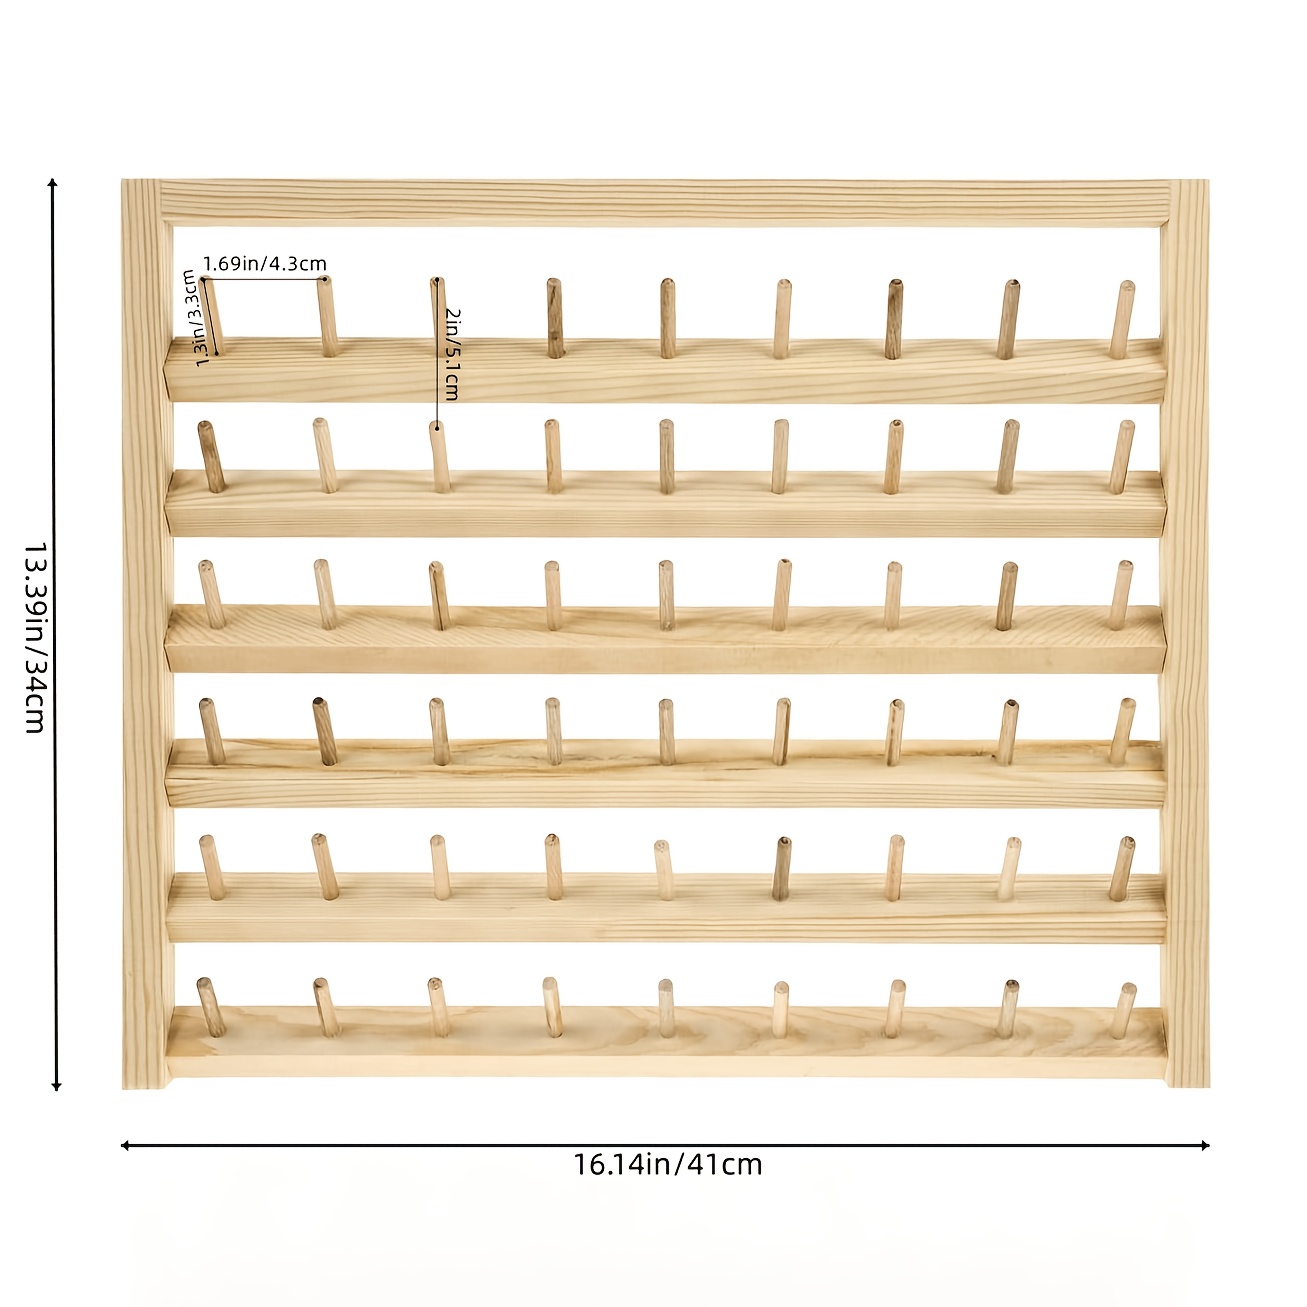 Oumilen 54-Spool Wall Mounted Wooden Sewing Thread Rack 